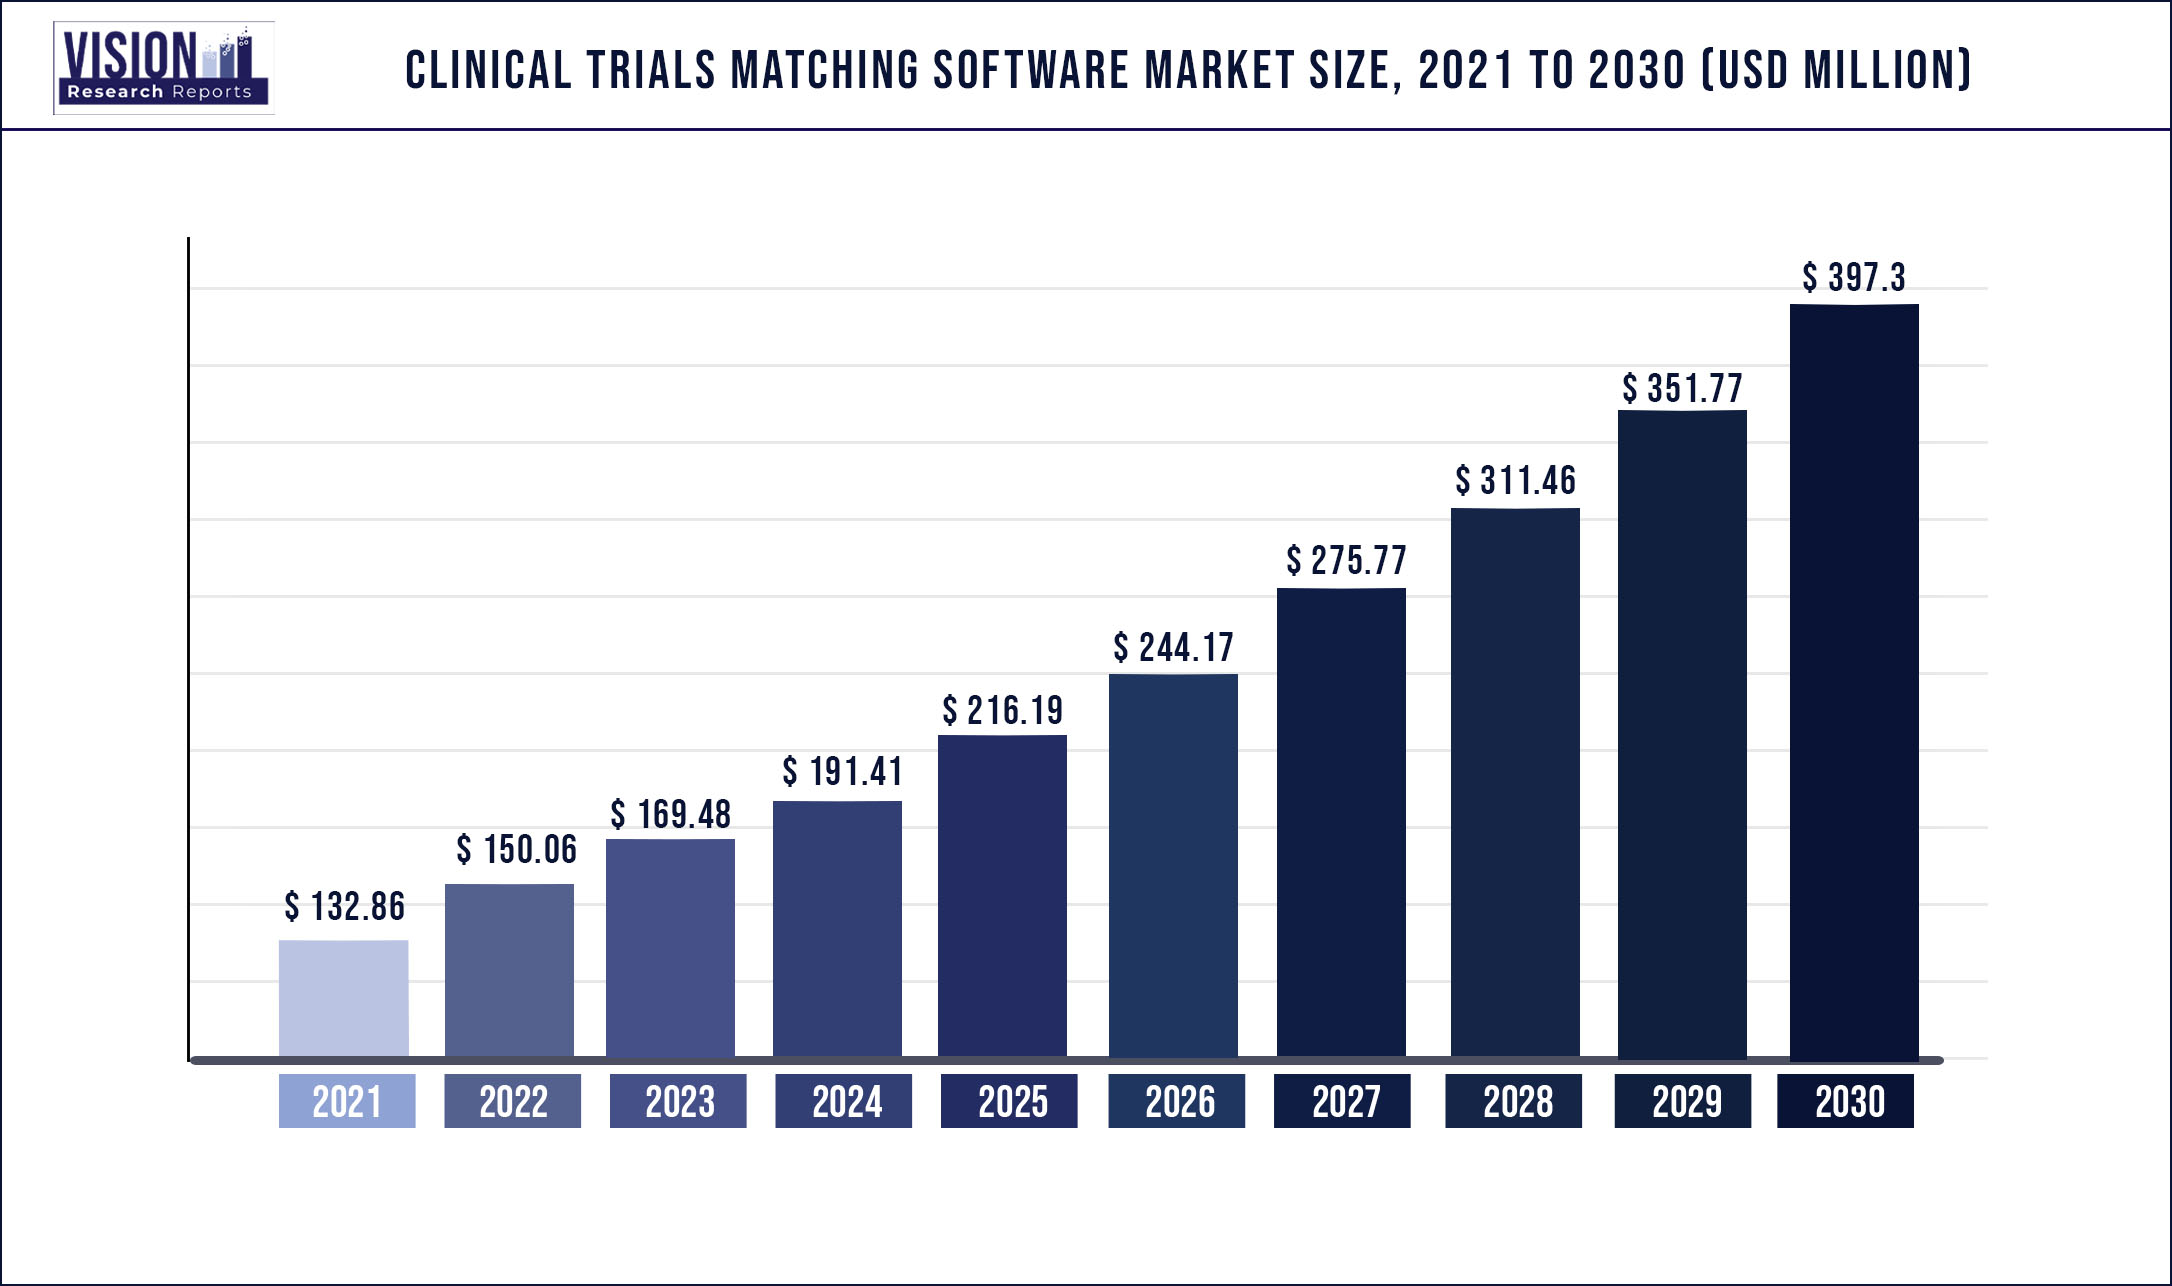 Clinical Trials Matching Software Market Size 2021 to 2030